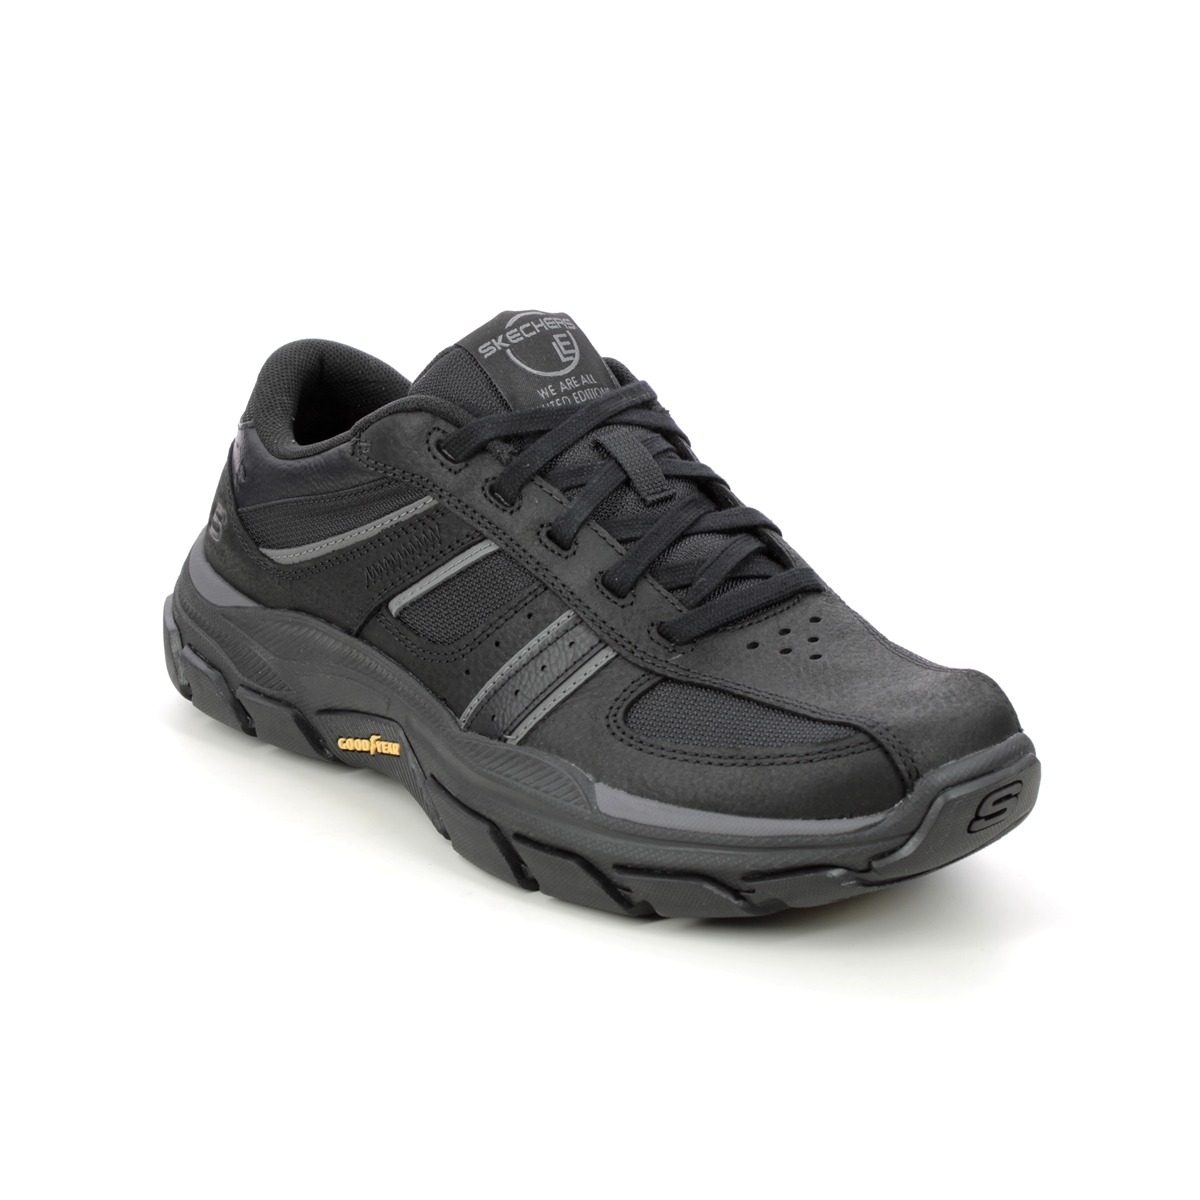 Skechers Respected Edgemere BLK Black Mens comfort shoes 204330 in a Plain Leather in Size 9